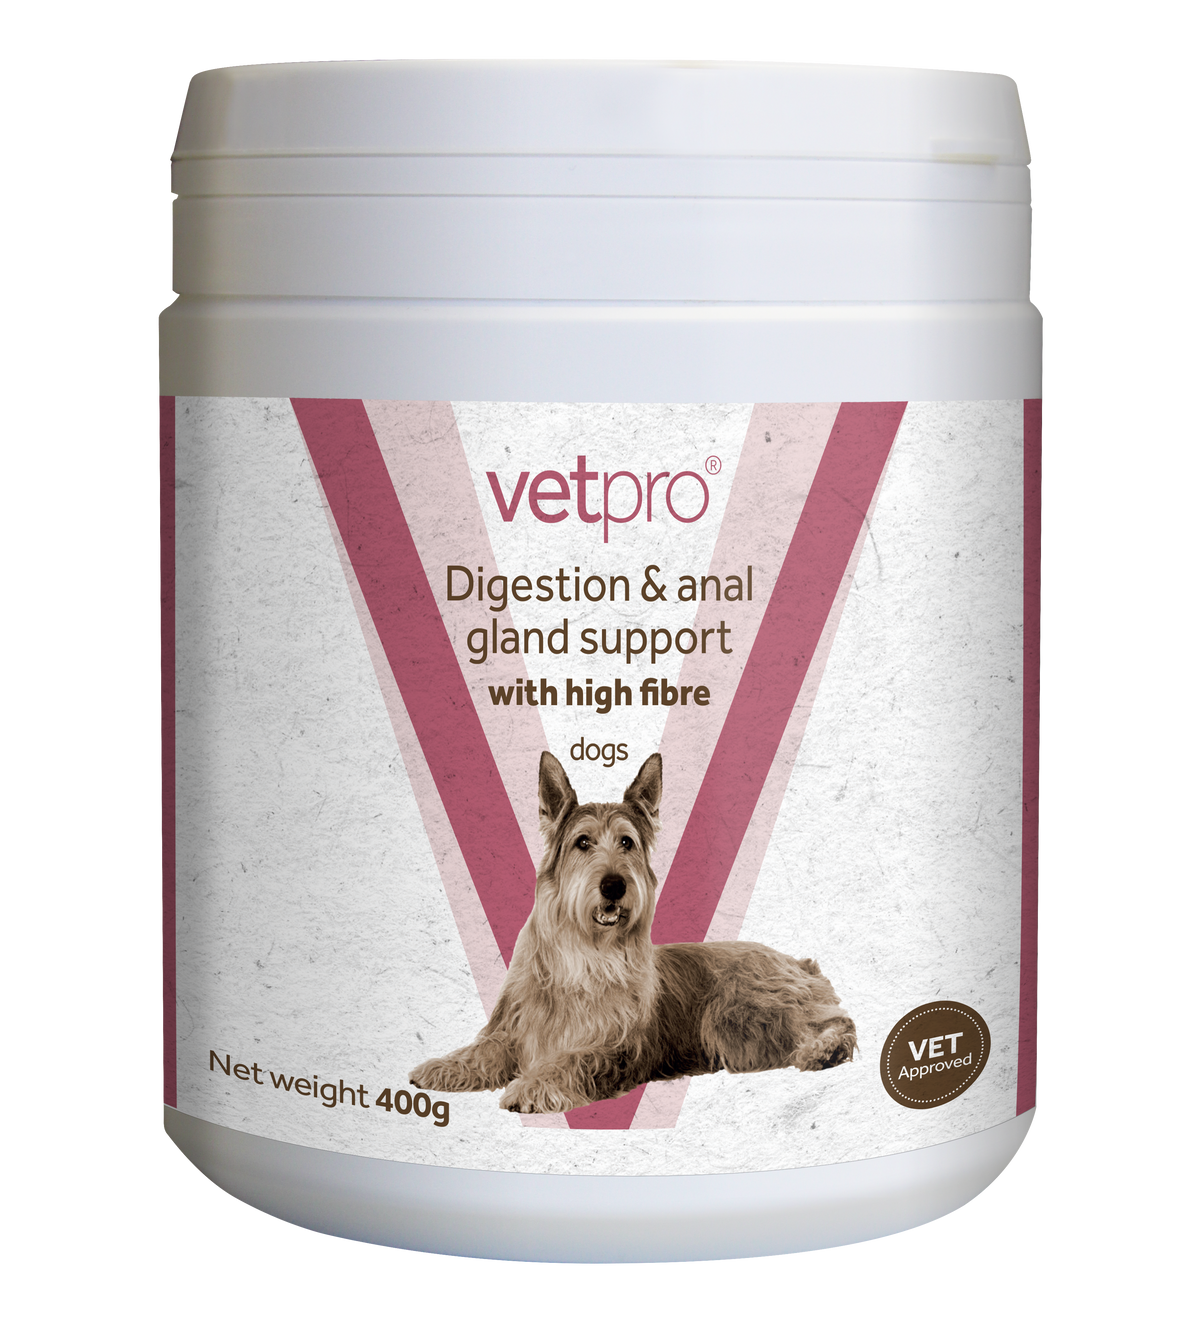 Vetpro Digestion & anal gland support with high fibre - 400g